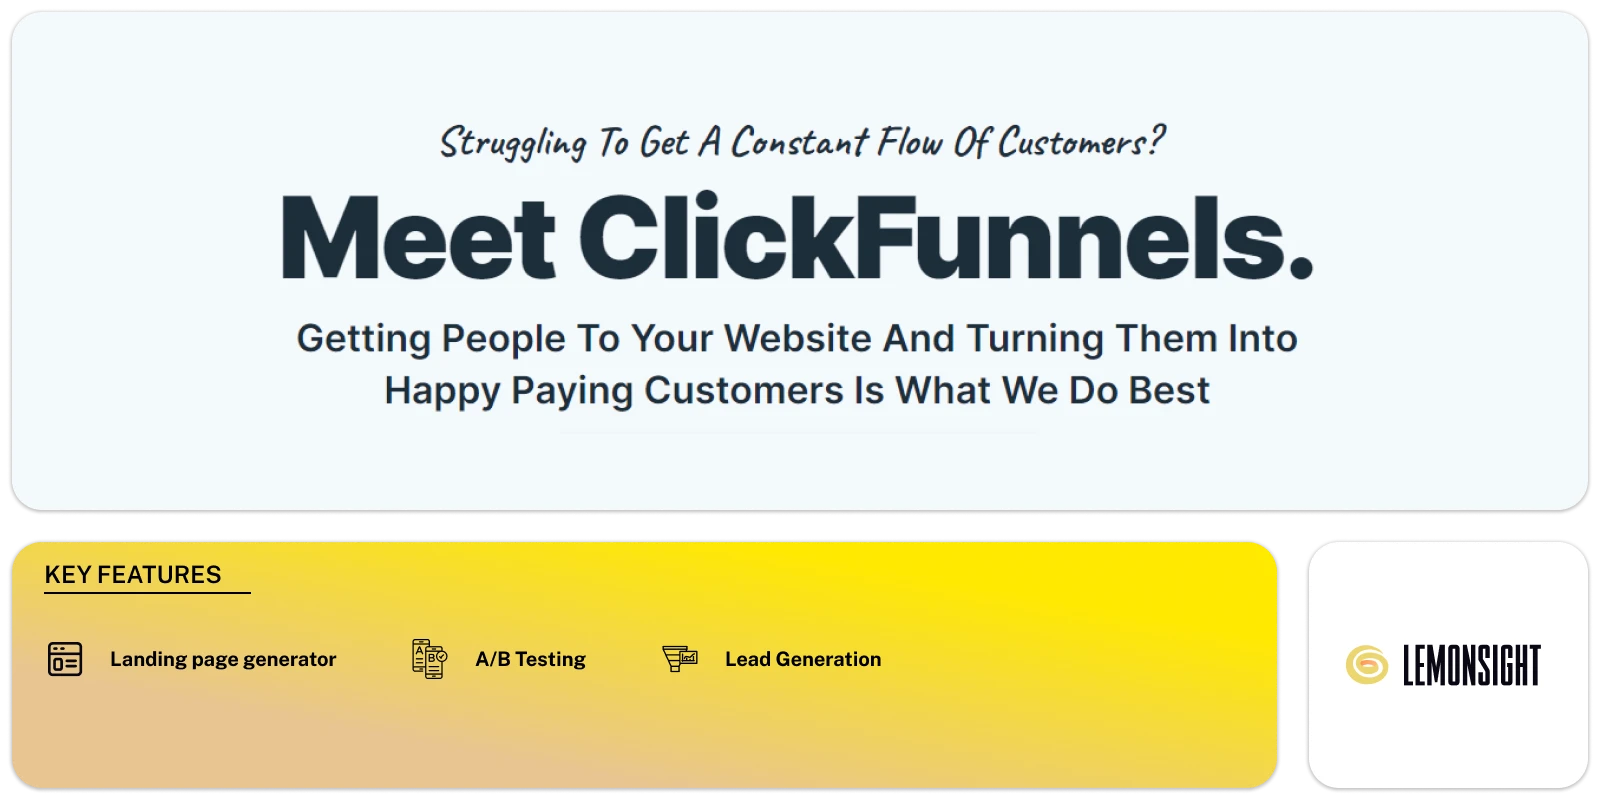 Clickfunnels Feature Image